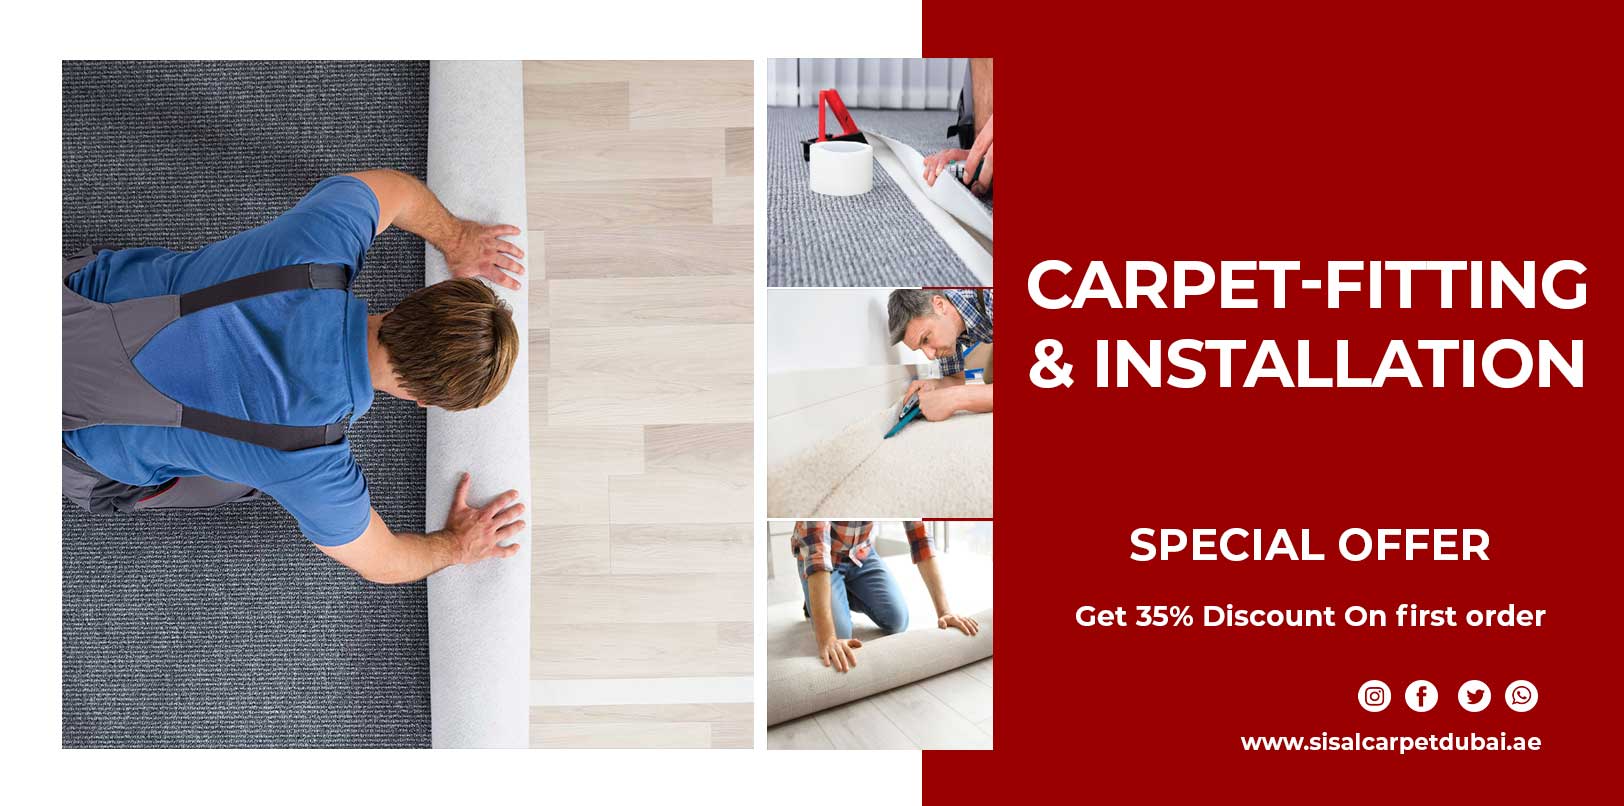 Carpet-fitting-and-installation